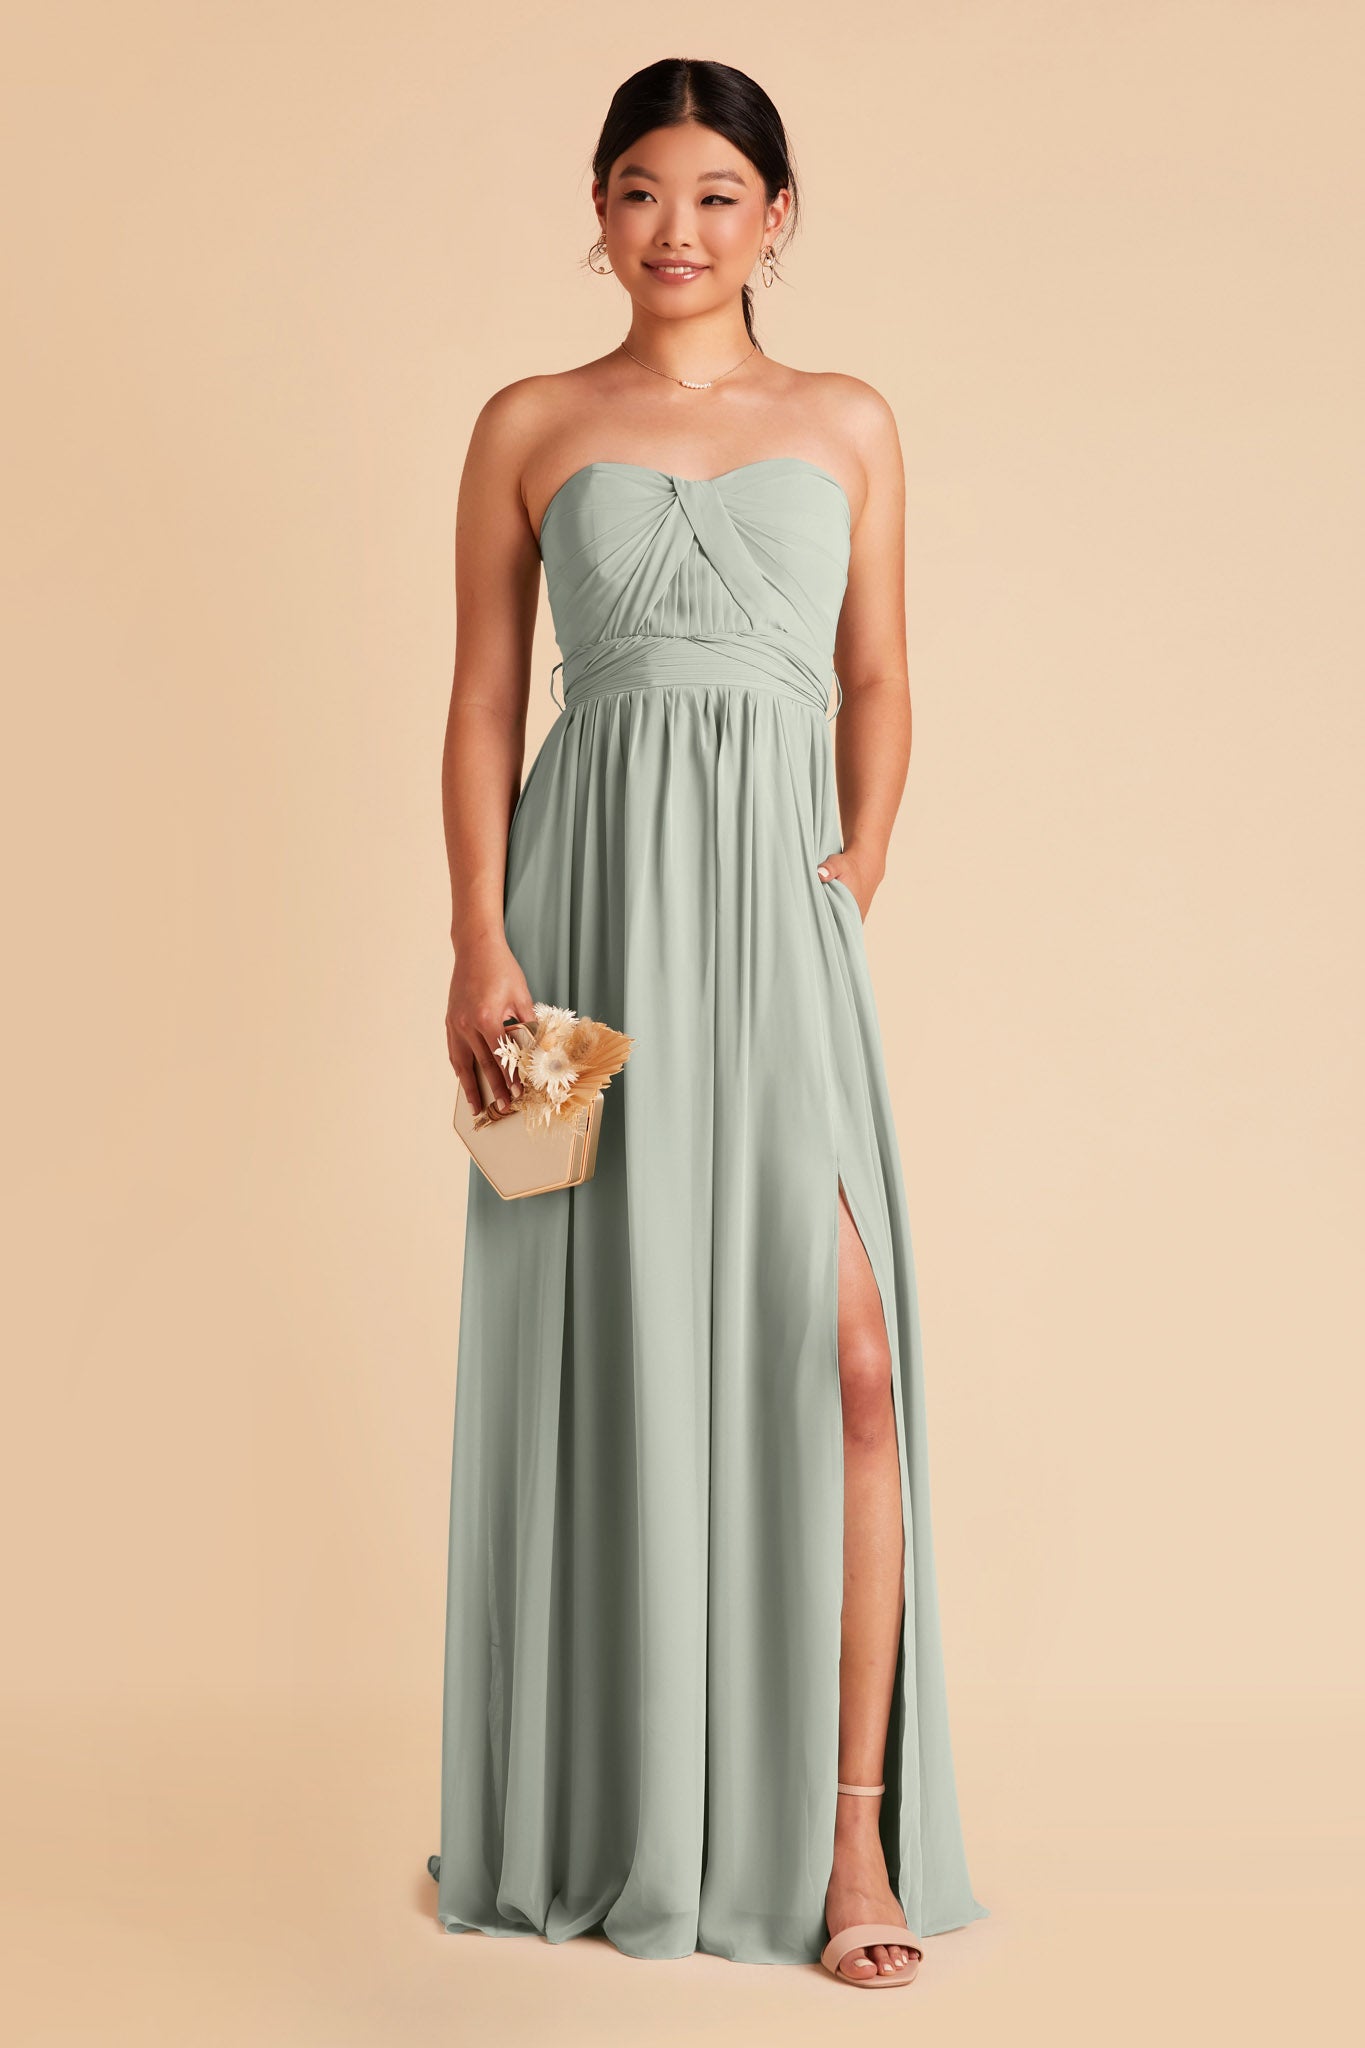 Front view of the Grace Convertible Bridesmaid Dress in sage chiffon by Birdy Grey features a strapless sweetheart neckline and flowing floor-length skirt with hidden pockets.